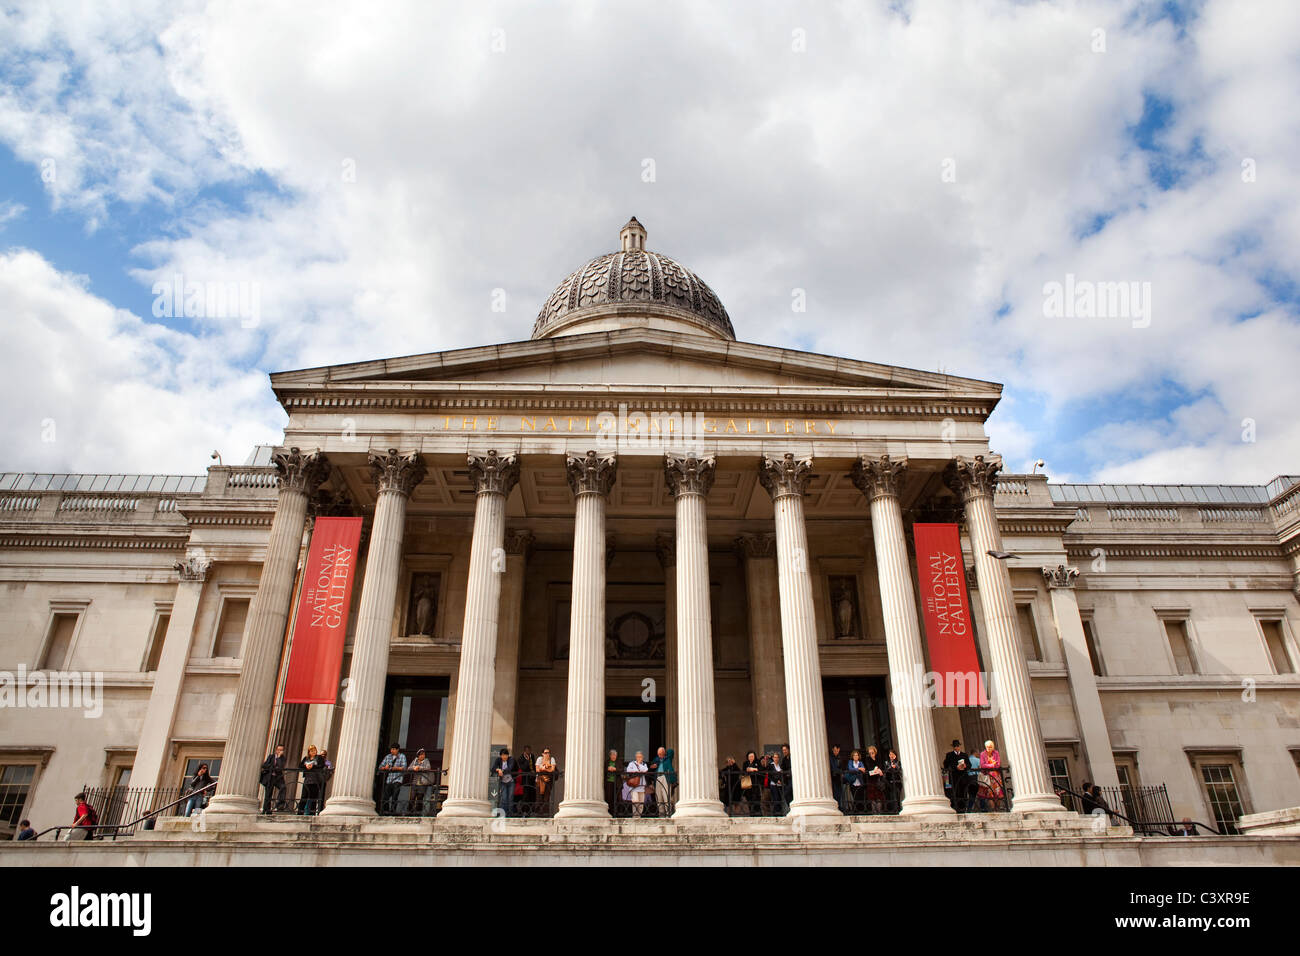 The National Gallery, London. Stock Photo